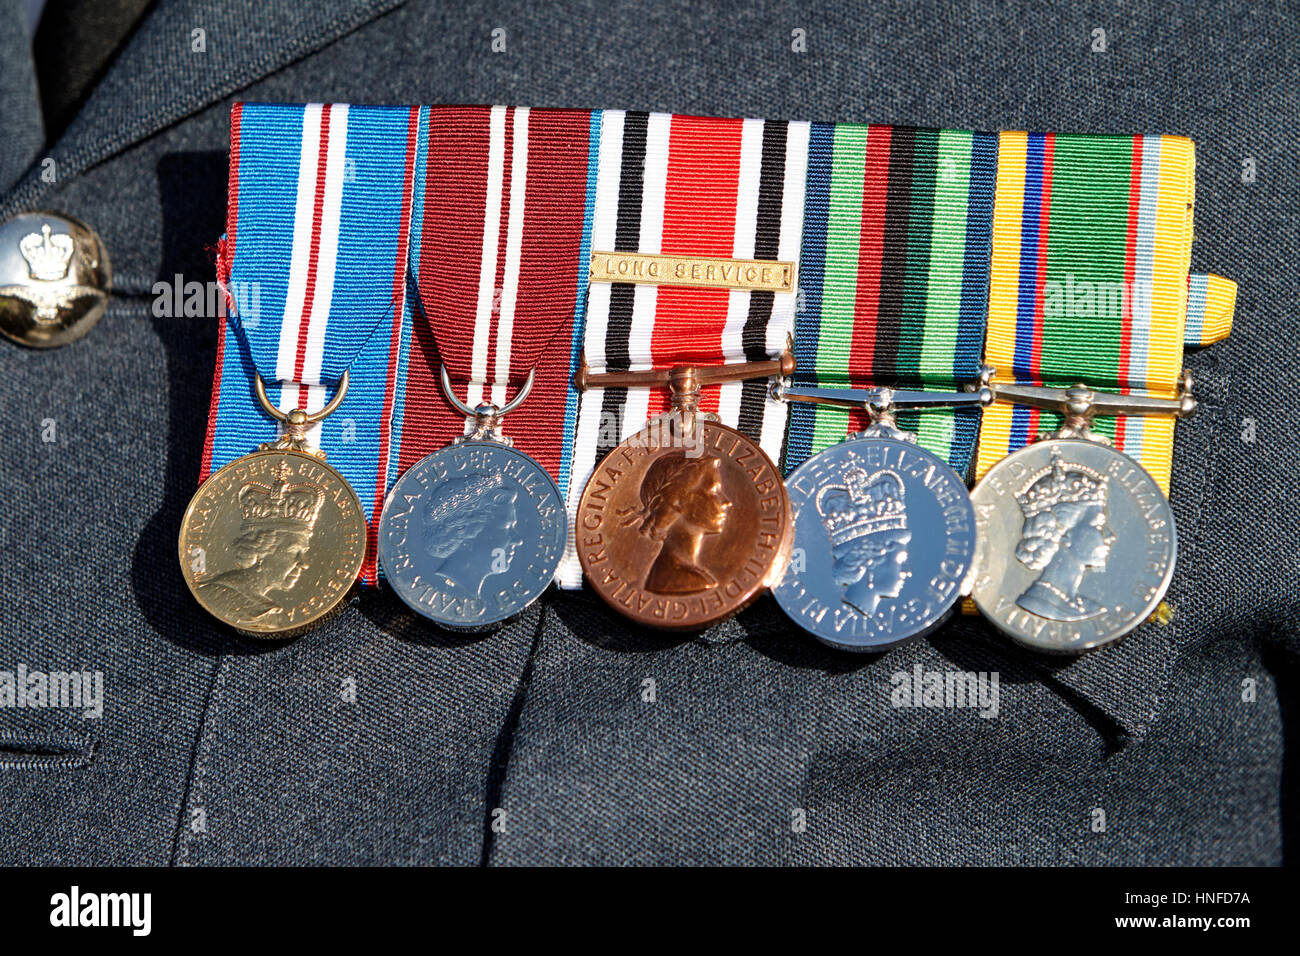 Northern Ireland RUC and special constabulary medals on RAF reservists chest includes golden jubilee medal (left) diamond jubille medal (2nd left) spe Stock Photo